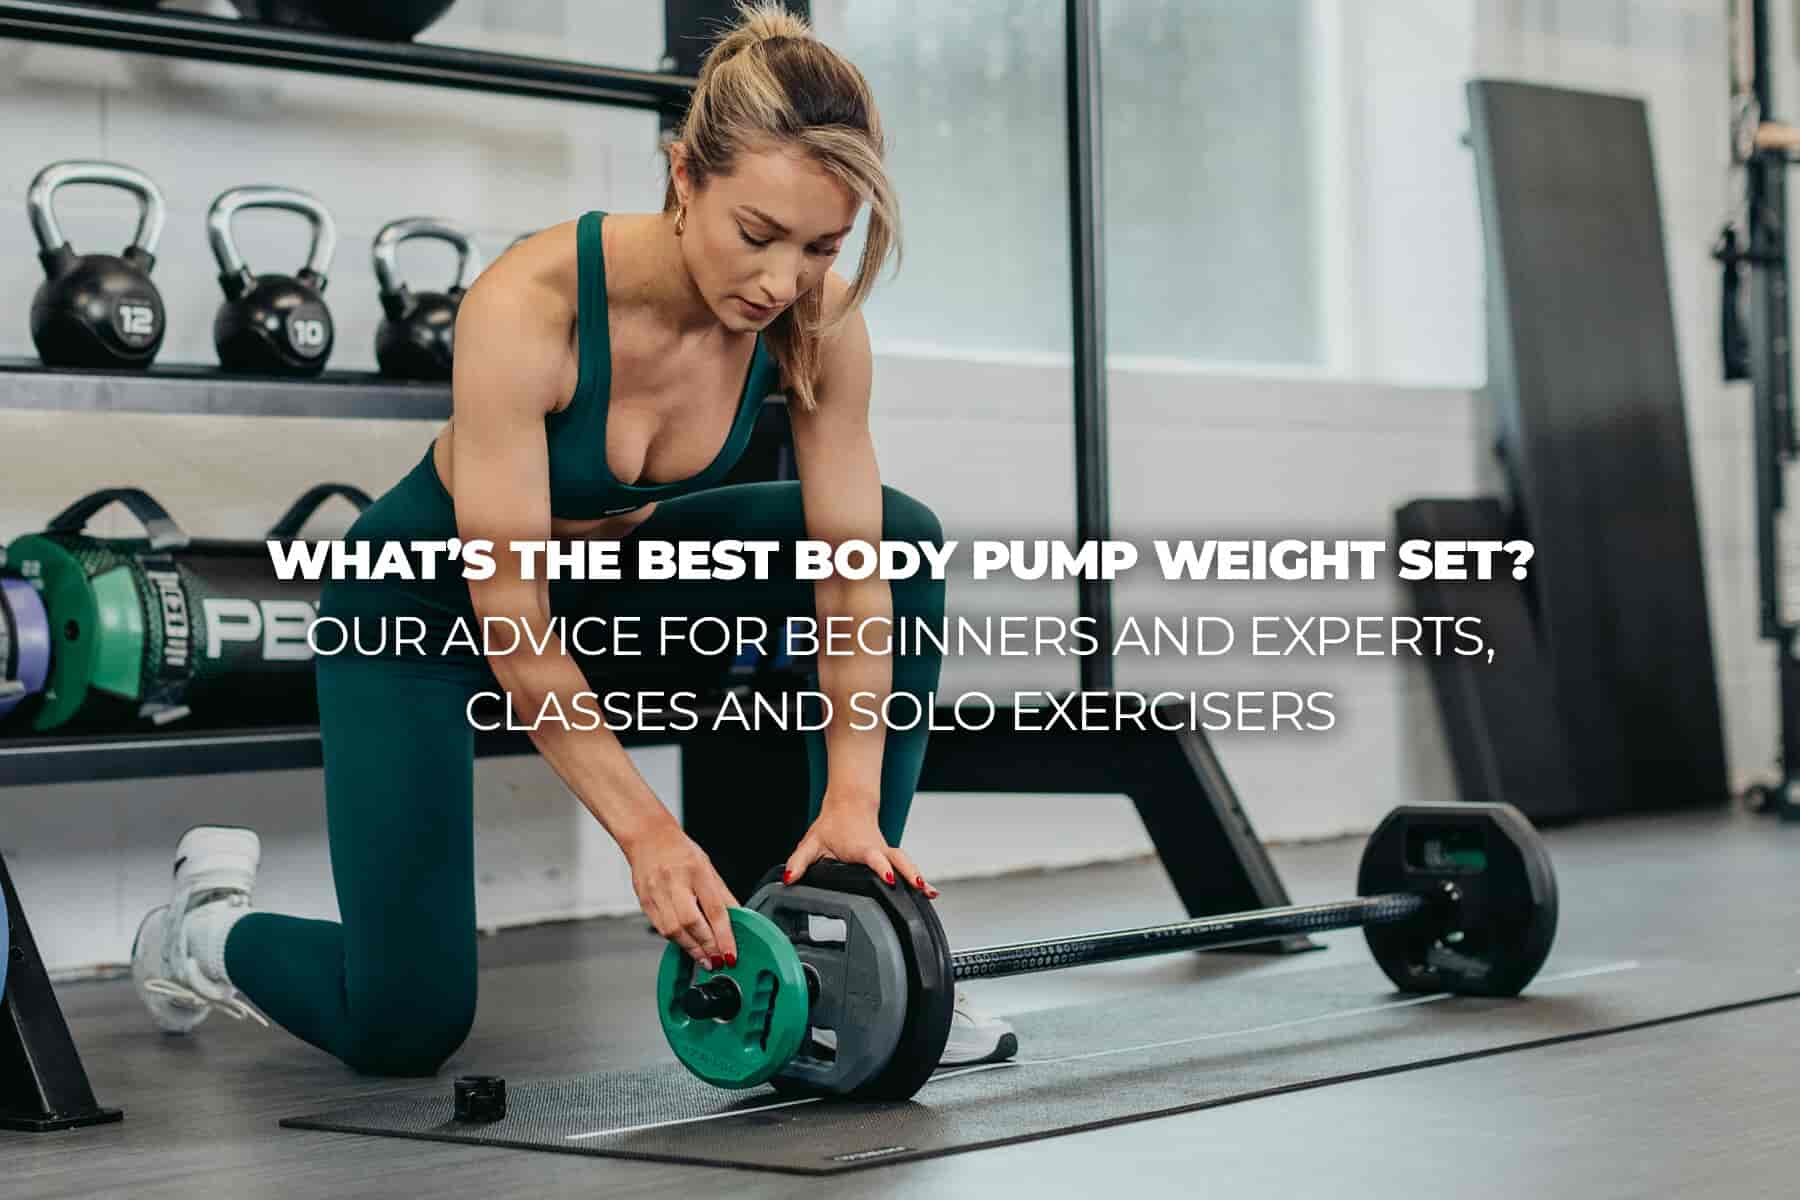 What’s the best Body Pump weight set? Our advice for beginners and experts, classes and solo exercisers